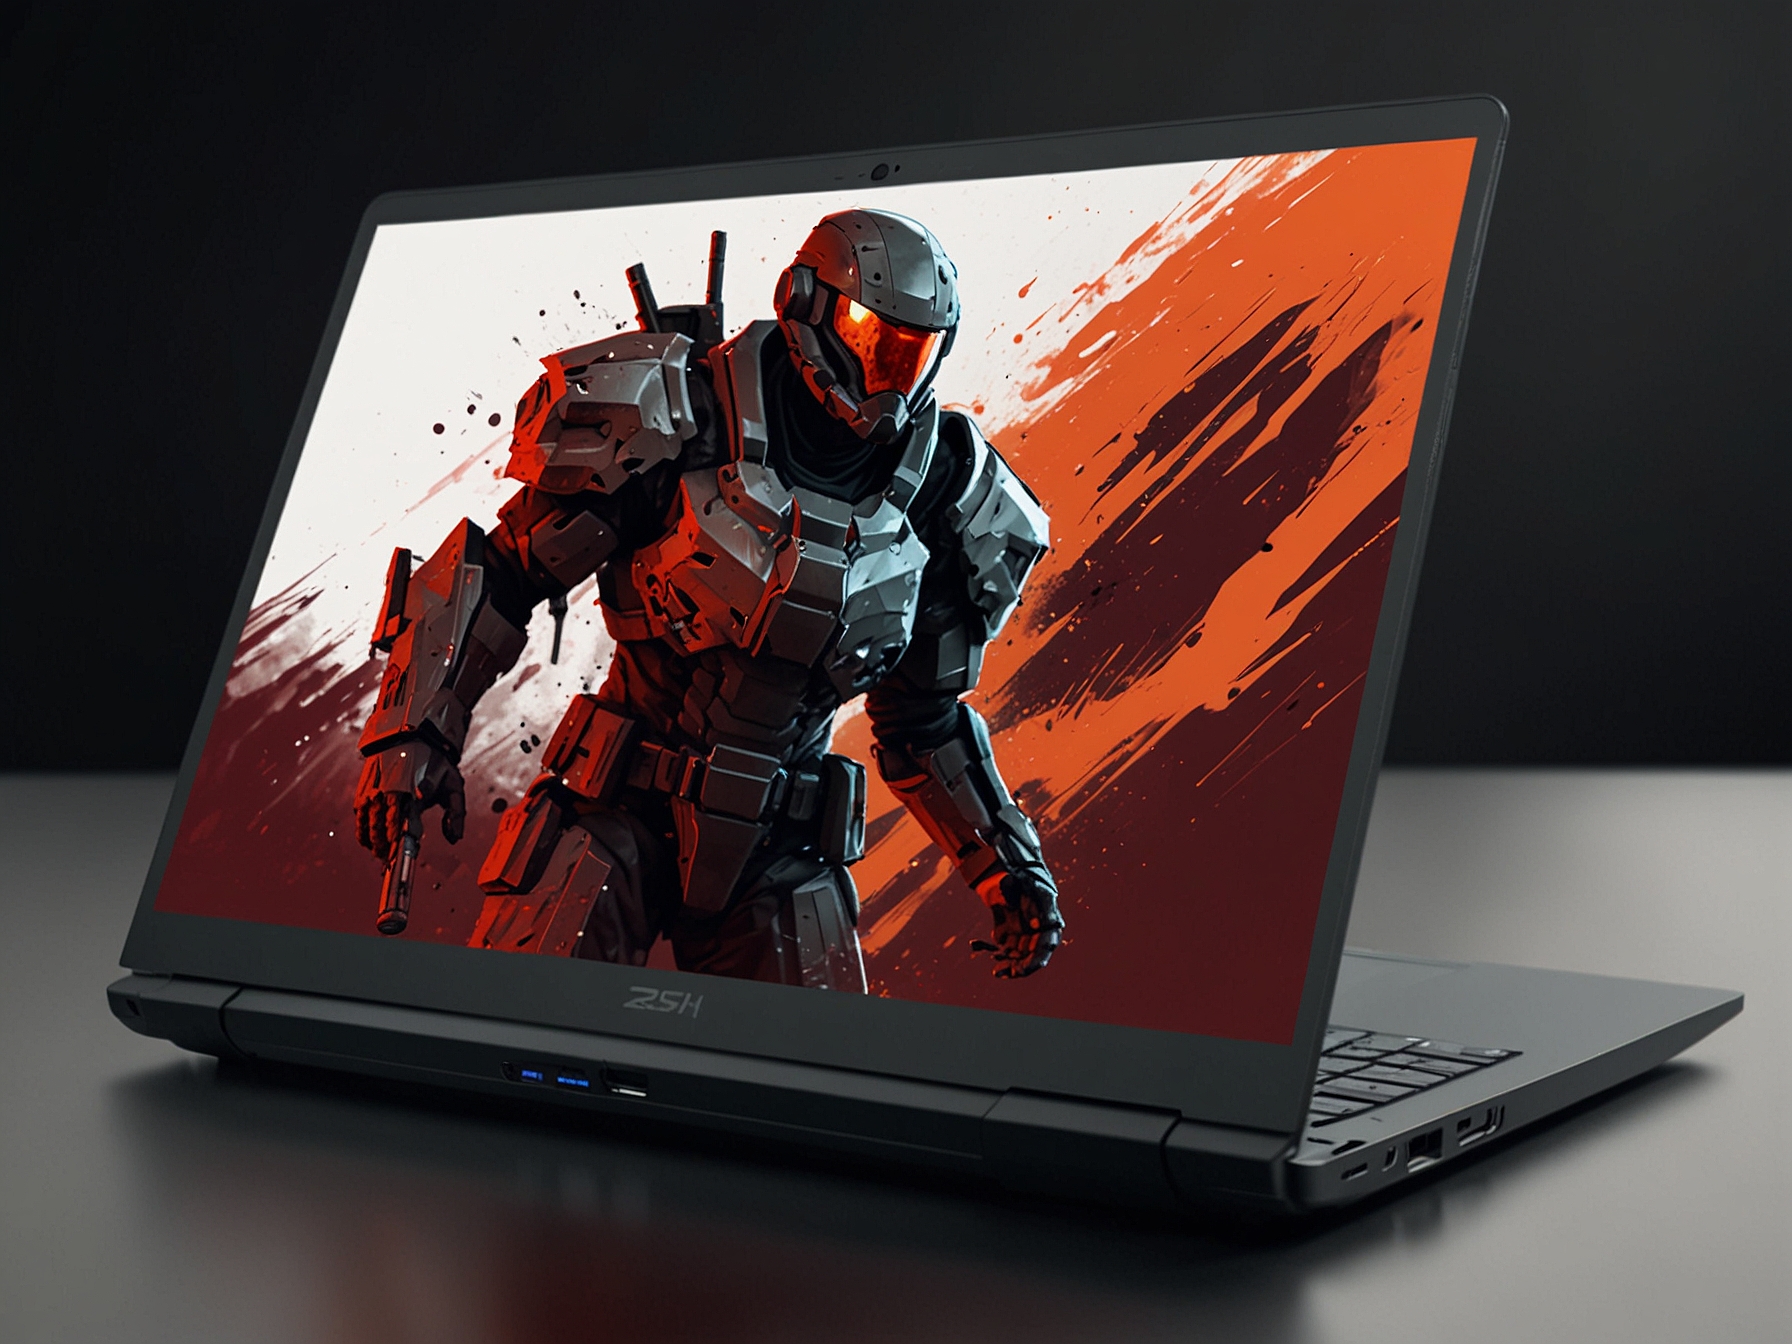 A sleek gaming laptop with a vibrant 4K display showing an intense gaming scene, highlighting the best gaming experience for hardcore enthusiasts in 2024.